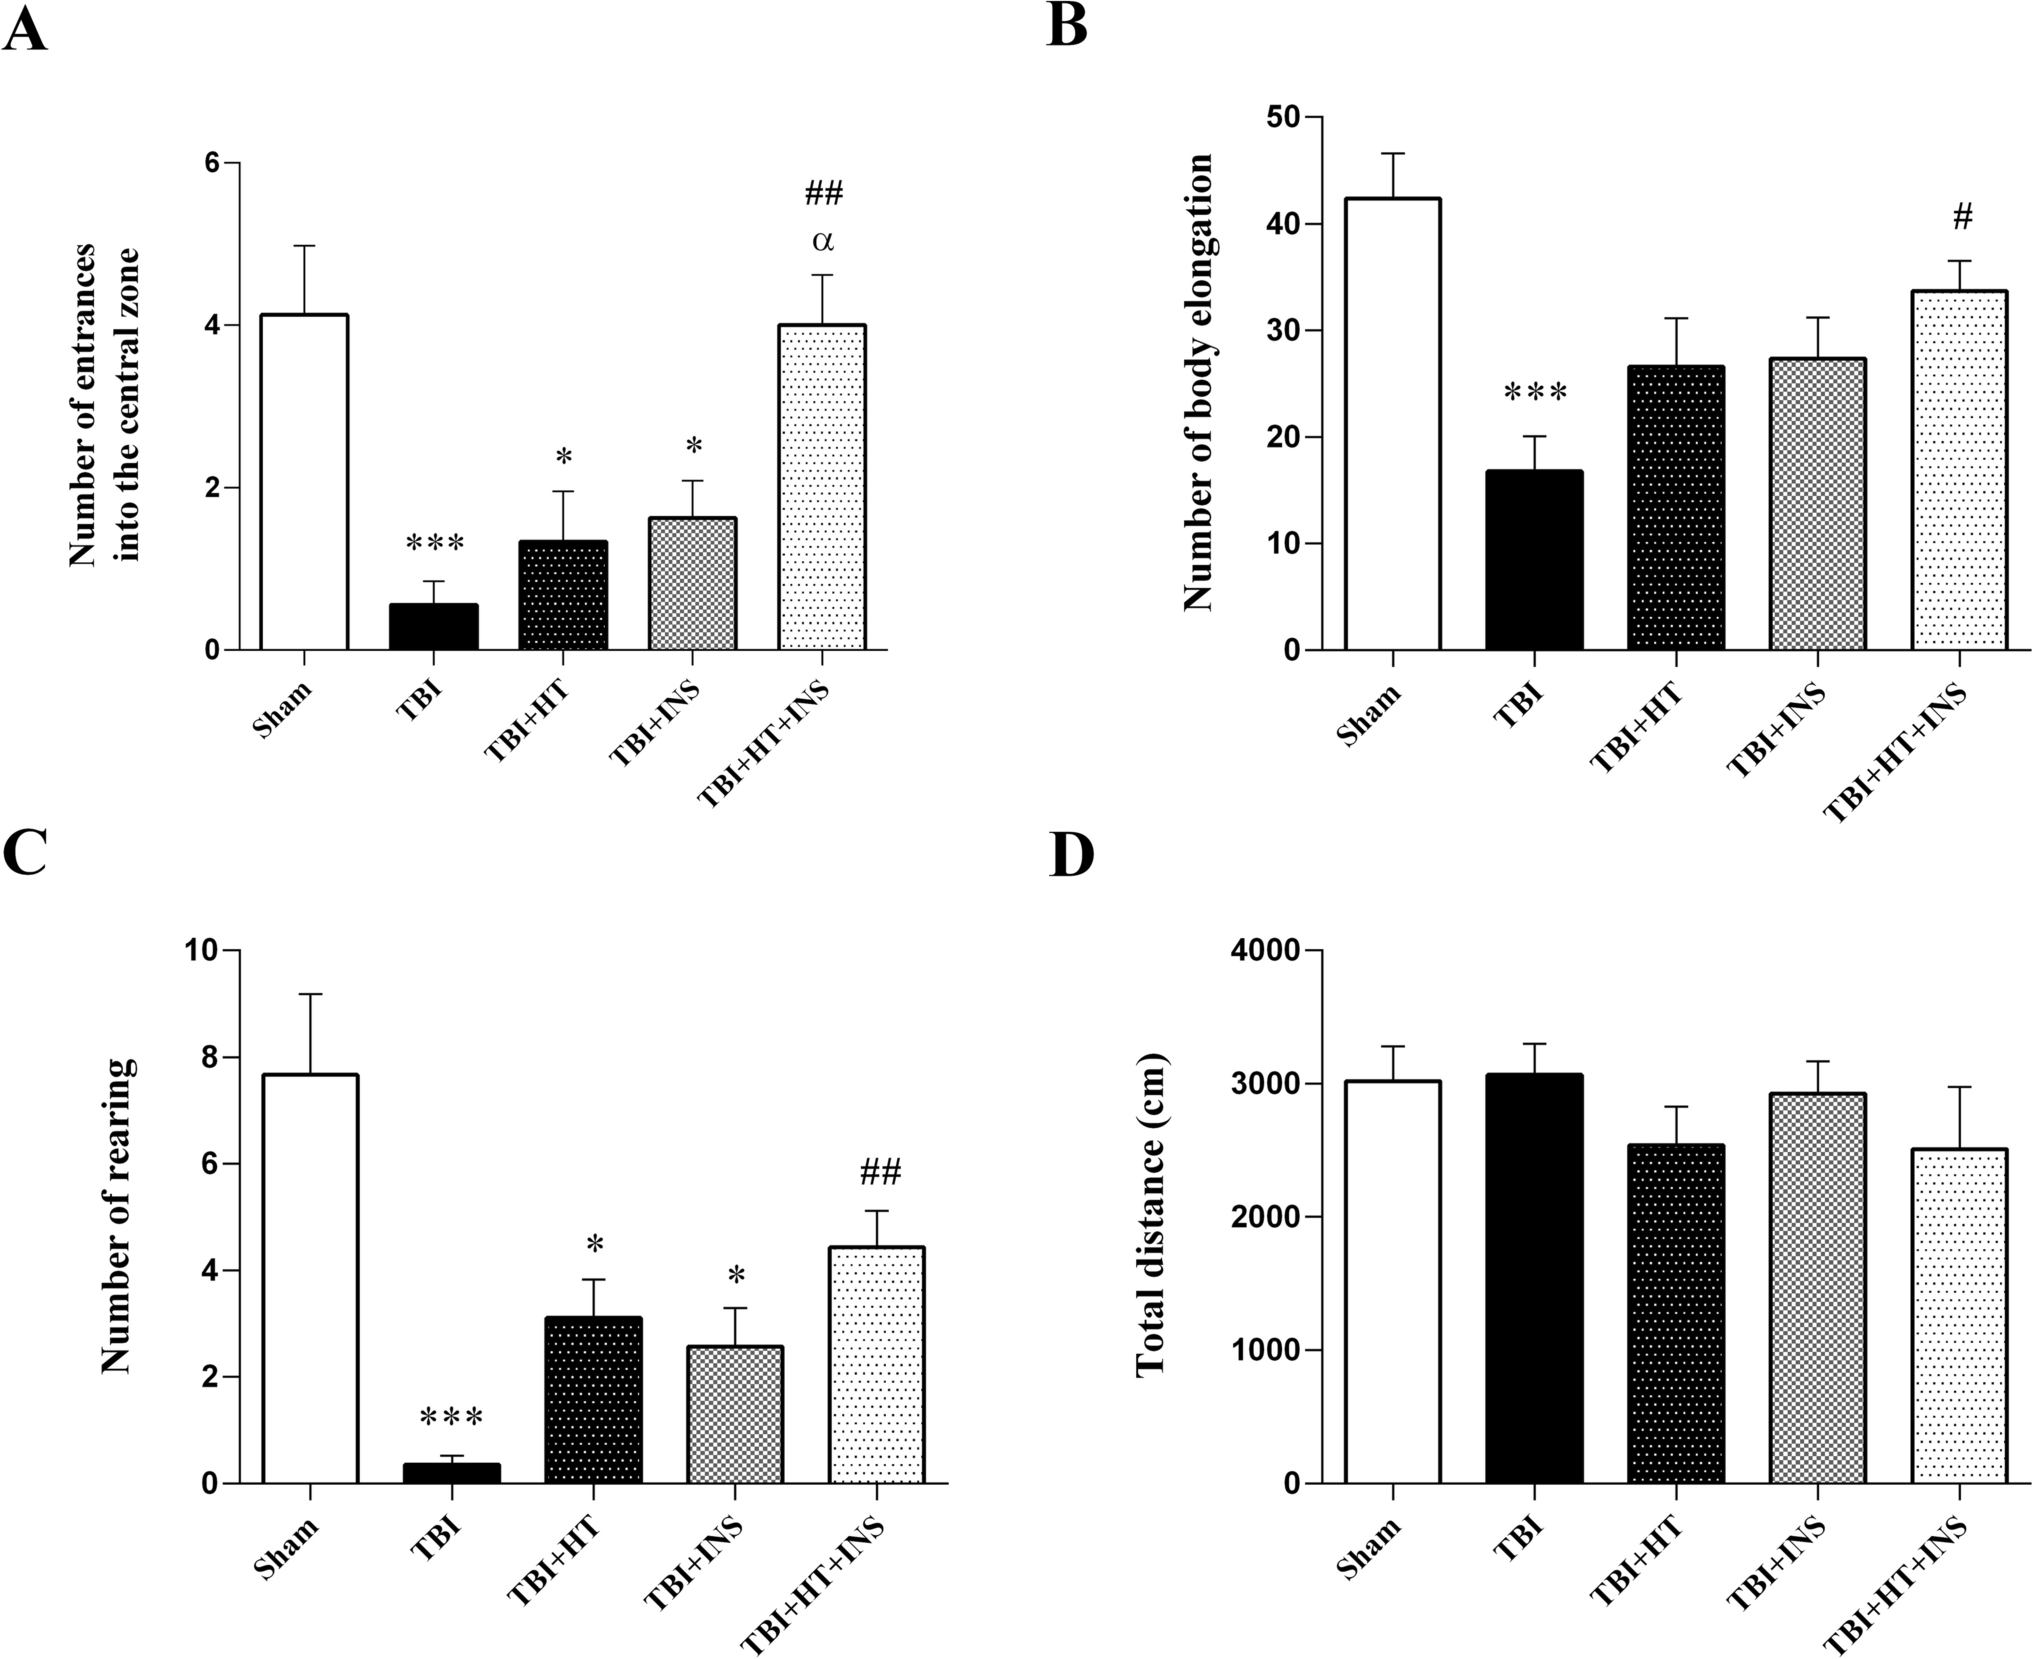 The combination treatment of hypothermia and intranasal insulin ameliorates the structural and functional changes in a rat model of traumatic brain injury